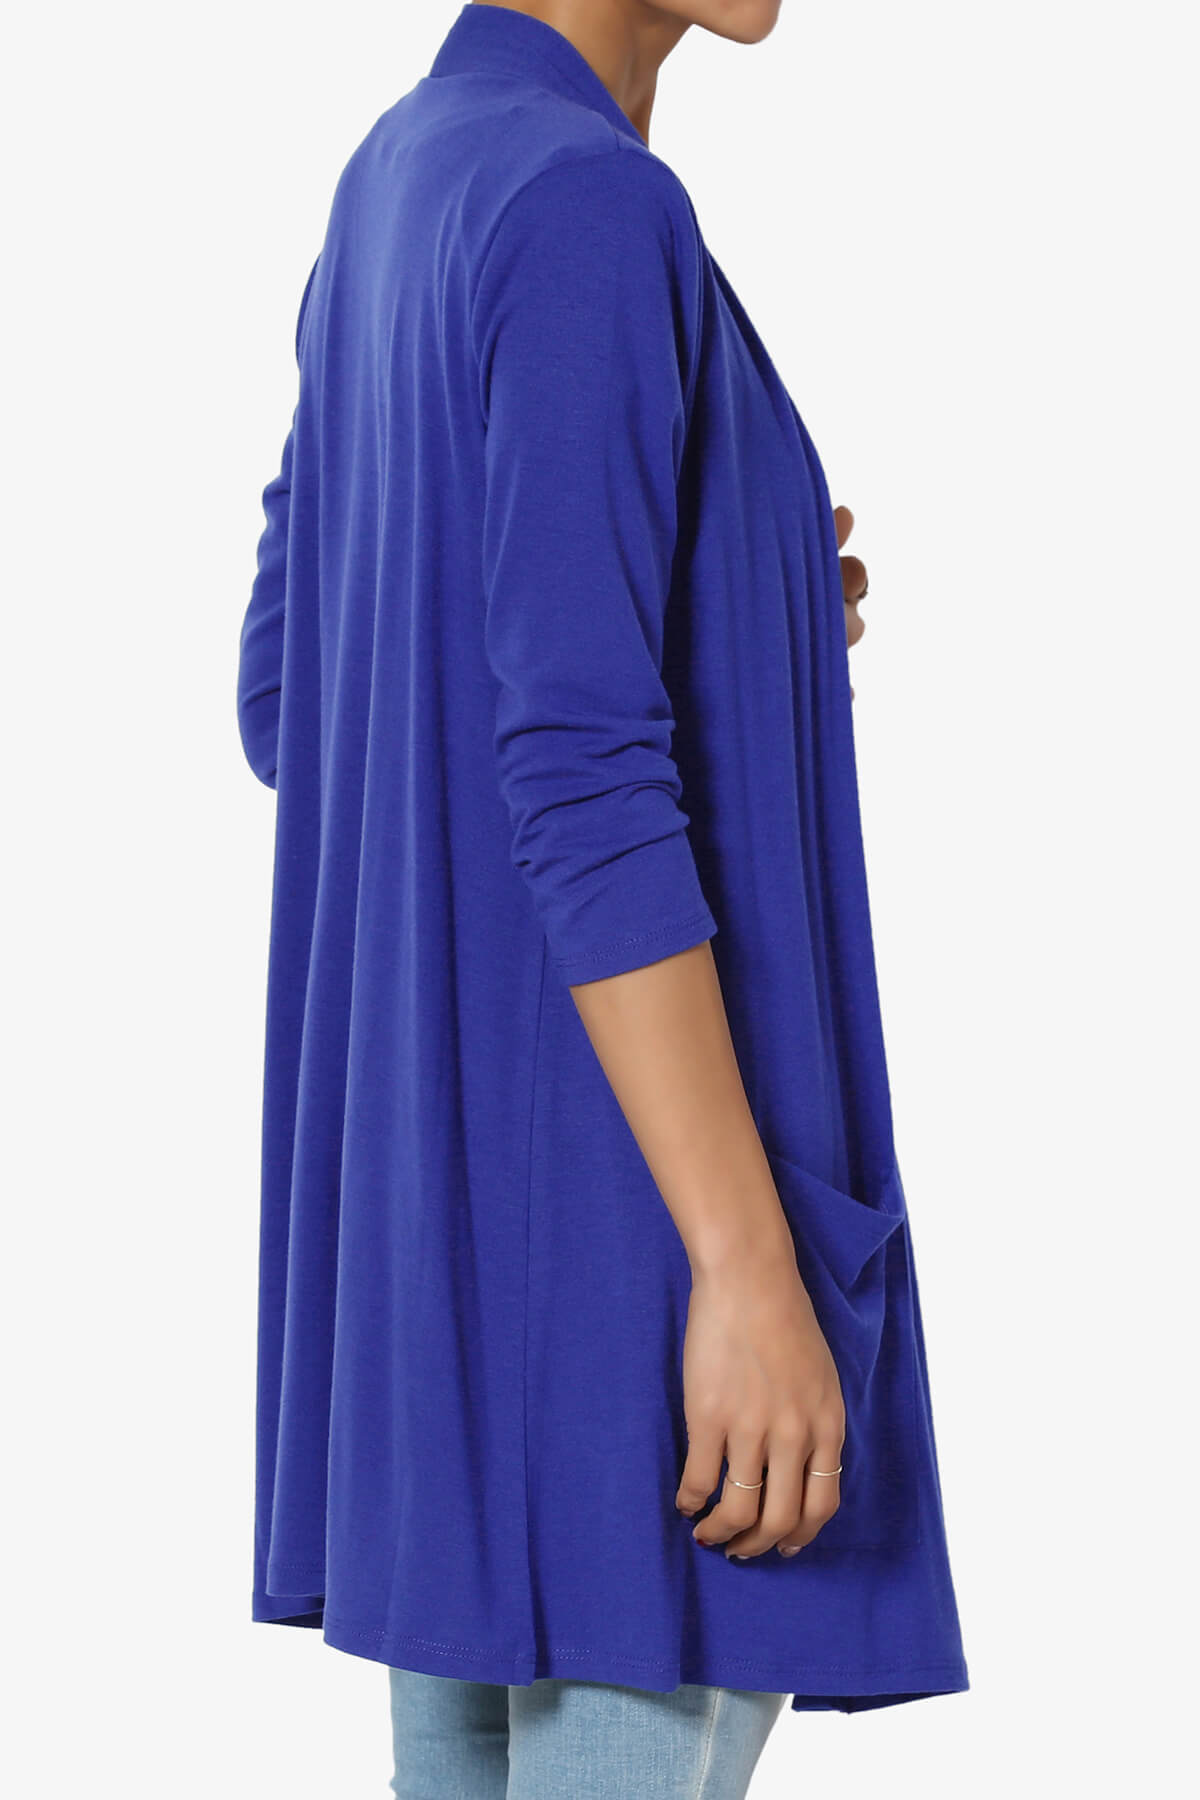 Load image into Gallery viewer, Daday Slouchy Pocket 3/4 Sleeve Cardigan BRIGHT BLUE_4
